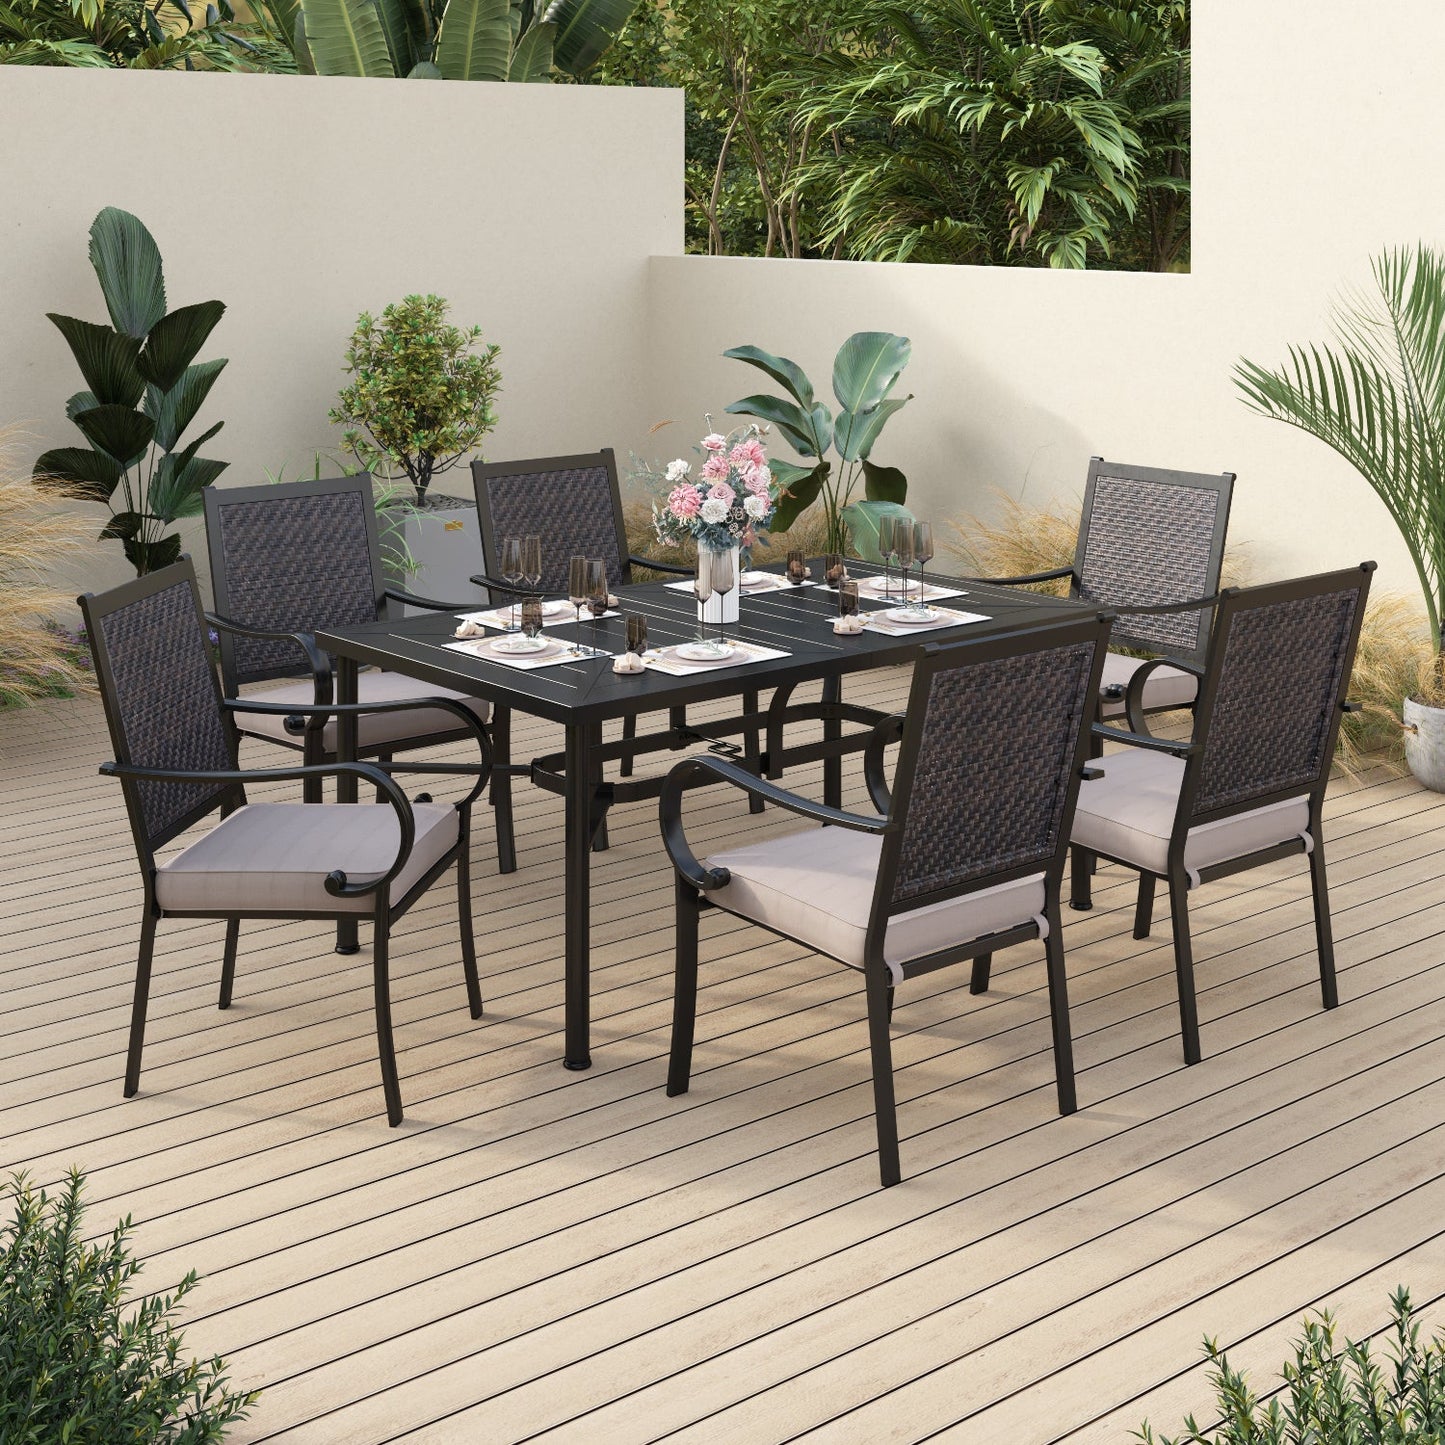 Sophia & William 7 Pieces Outdoor Patio Dining Set Wicker Rattan Chairs and Rectangle Steel Table for 6 person